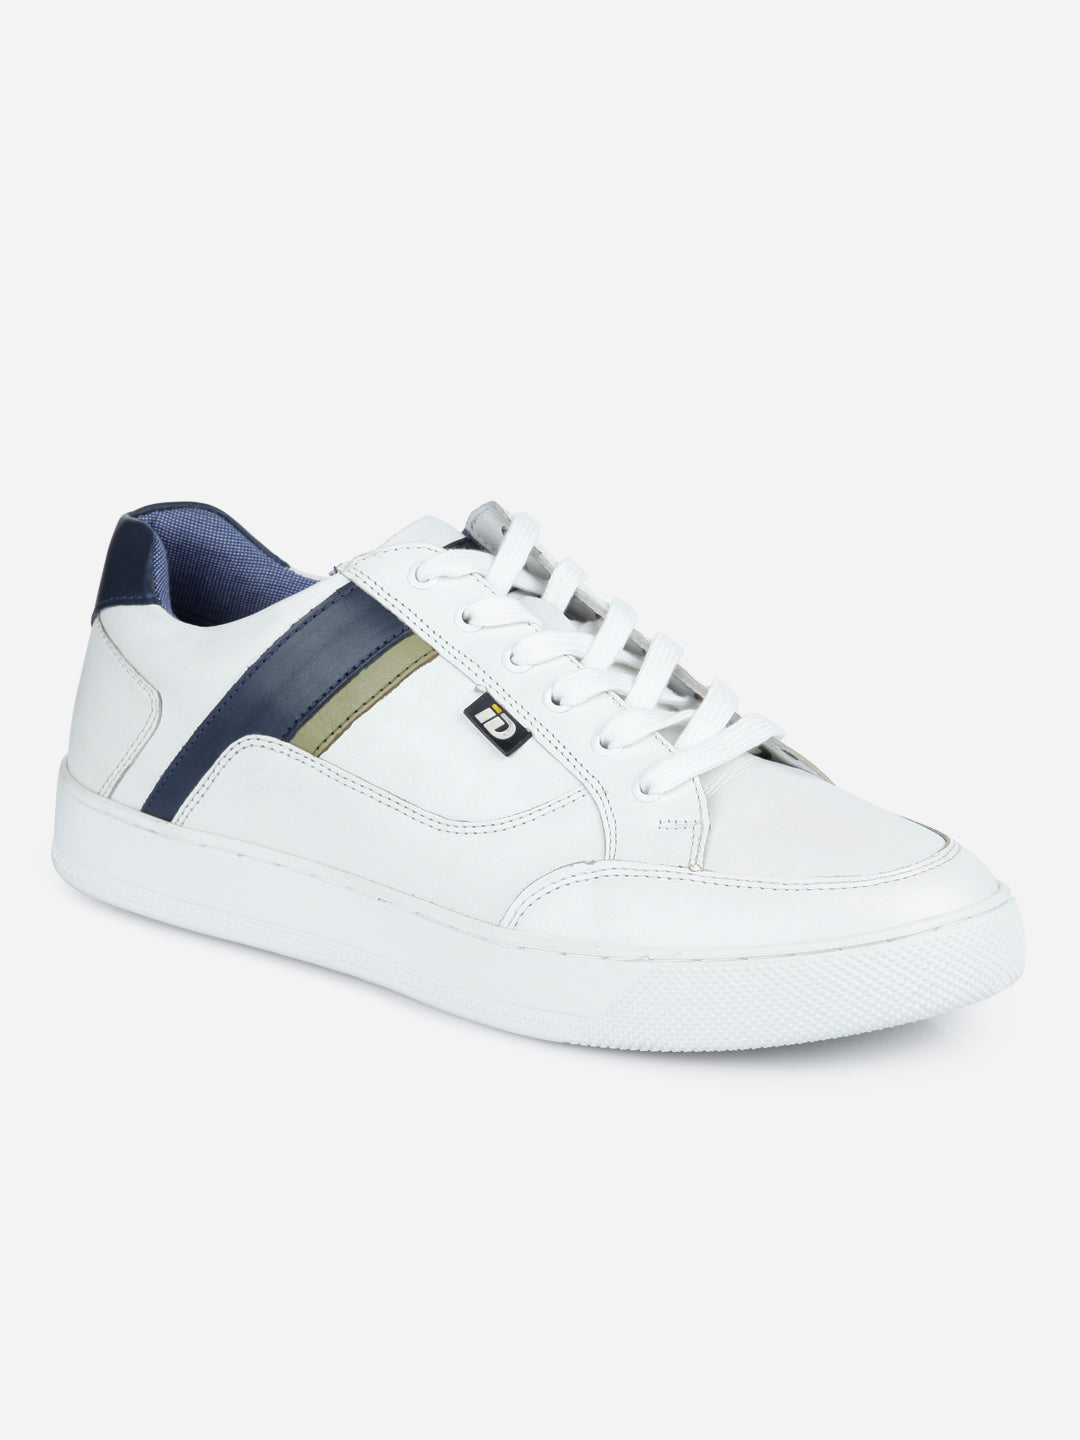 Men's White Lace Up Sneaker (ID3052) - Sneakers | Shop at Rs. 2,985 ...